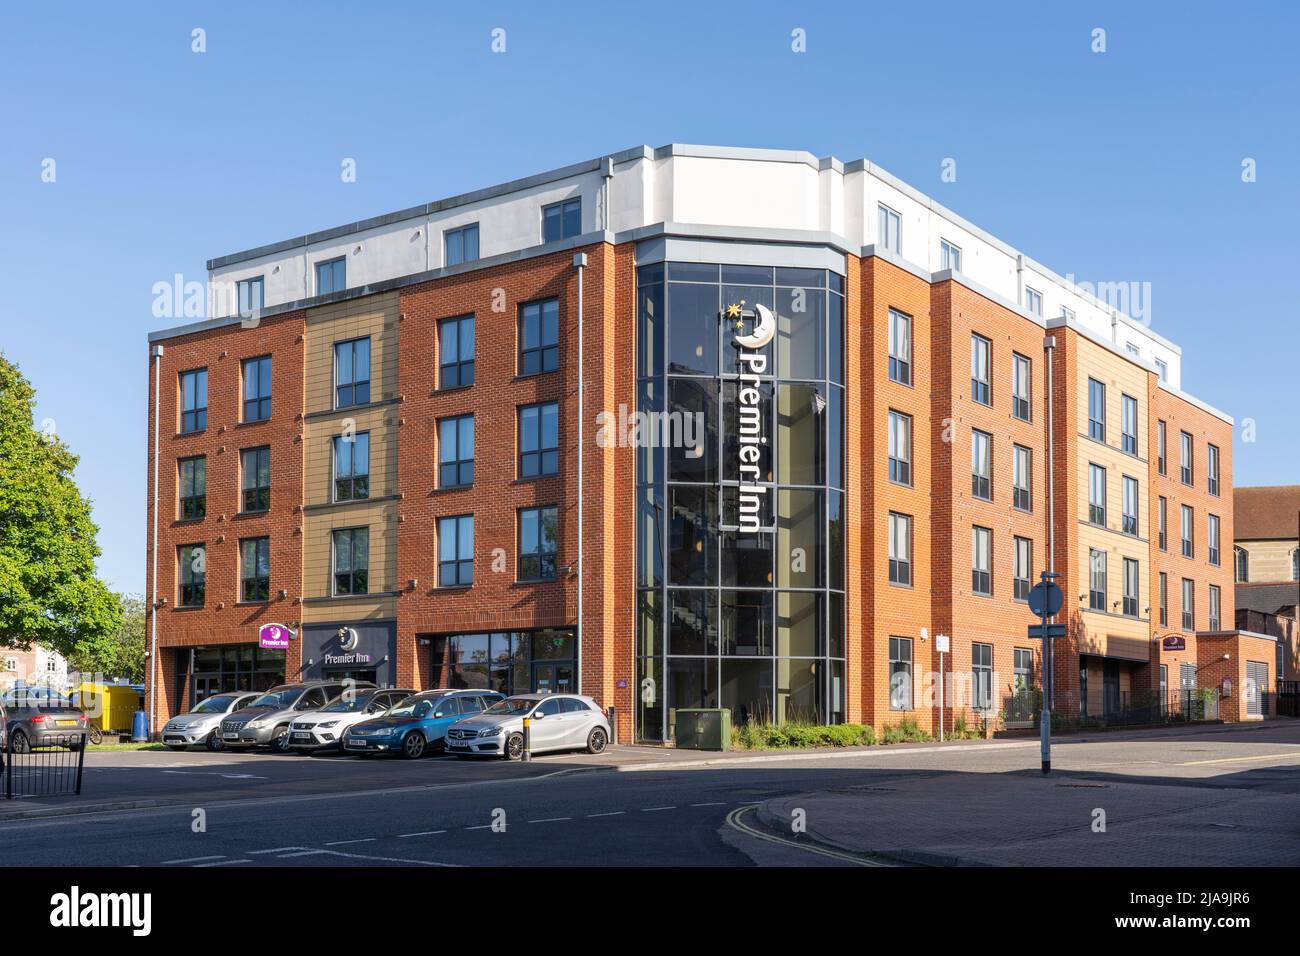 The Premier Inn hotel in Basingstoke town centre on a sunny day, England. Theme - hotel industry, occupancy rates, hotels industry, guest numbers Stock Photo